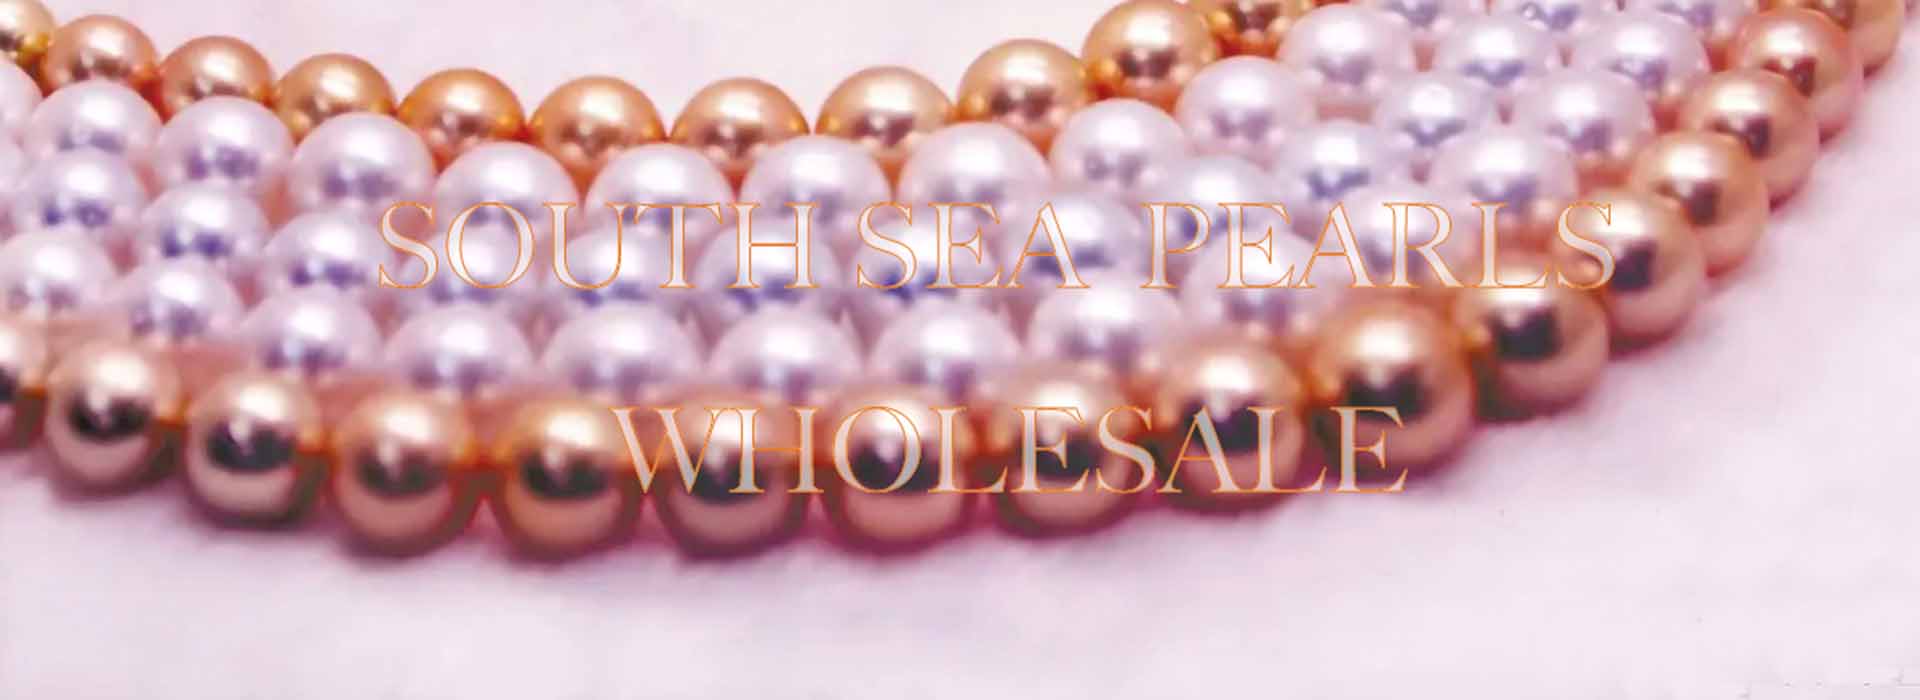 South Sea Pearls Wholesale from BAOYUE PEARL 